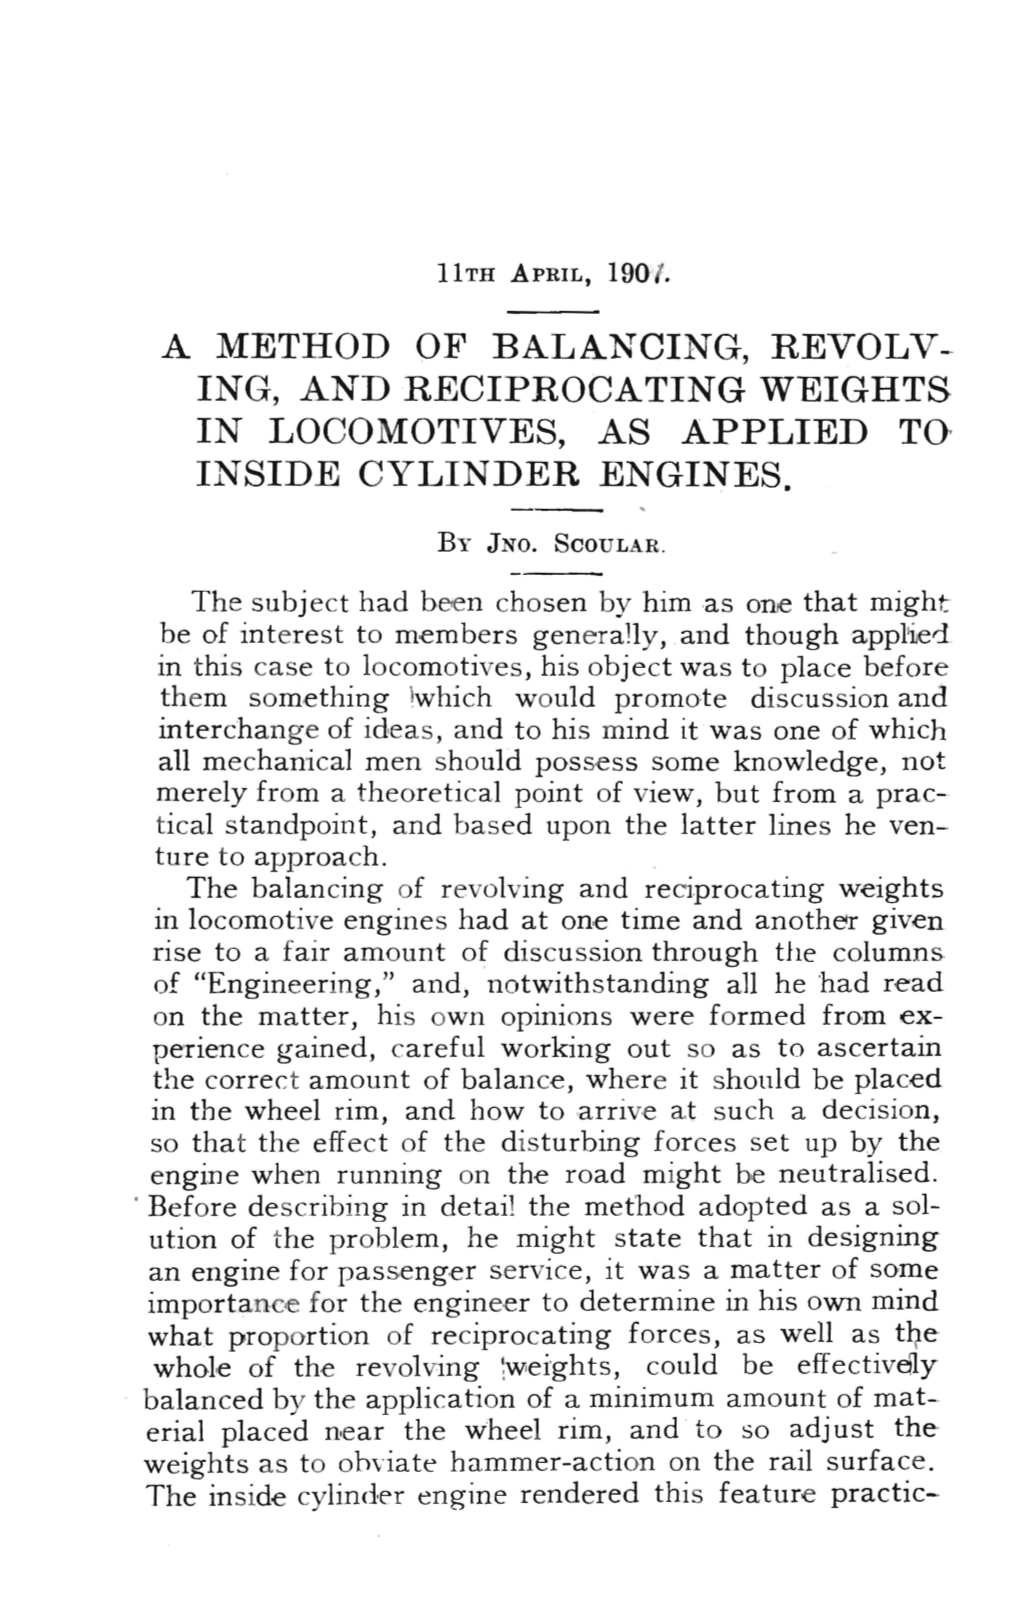 Ing, and Reciprocating Weights in Locomotives, As Applied to Inside Cylinder Engines